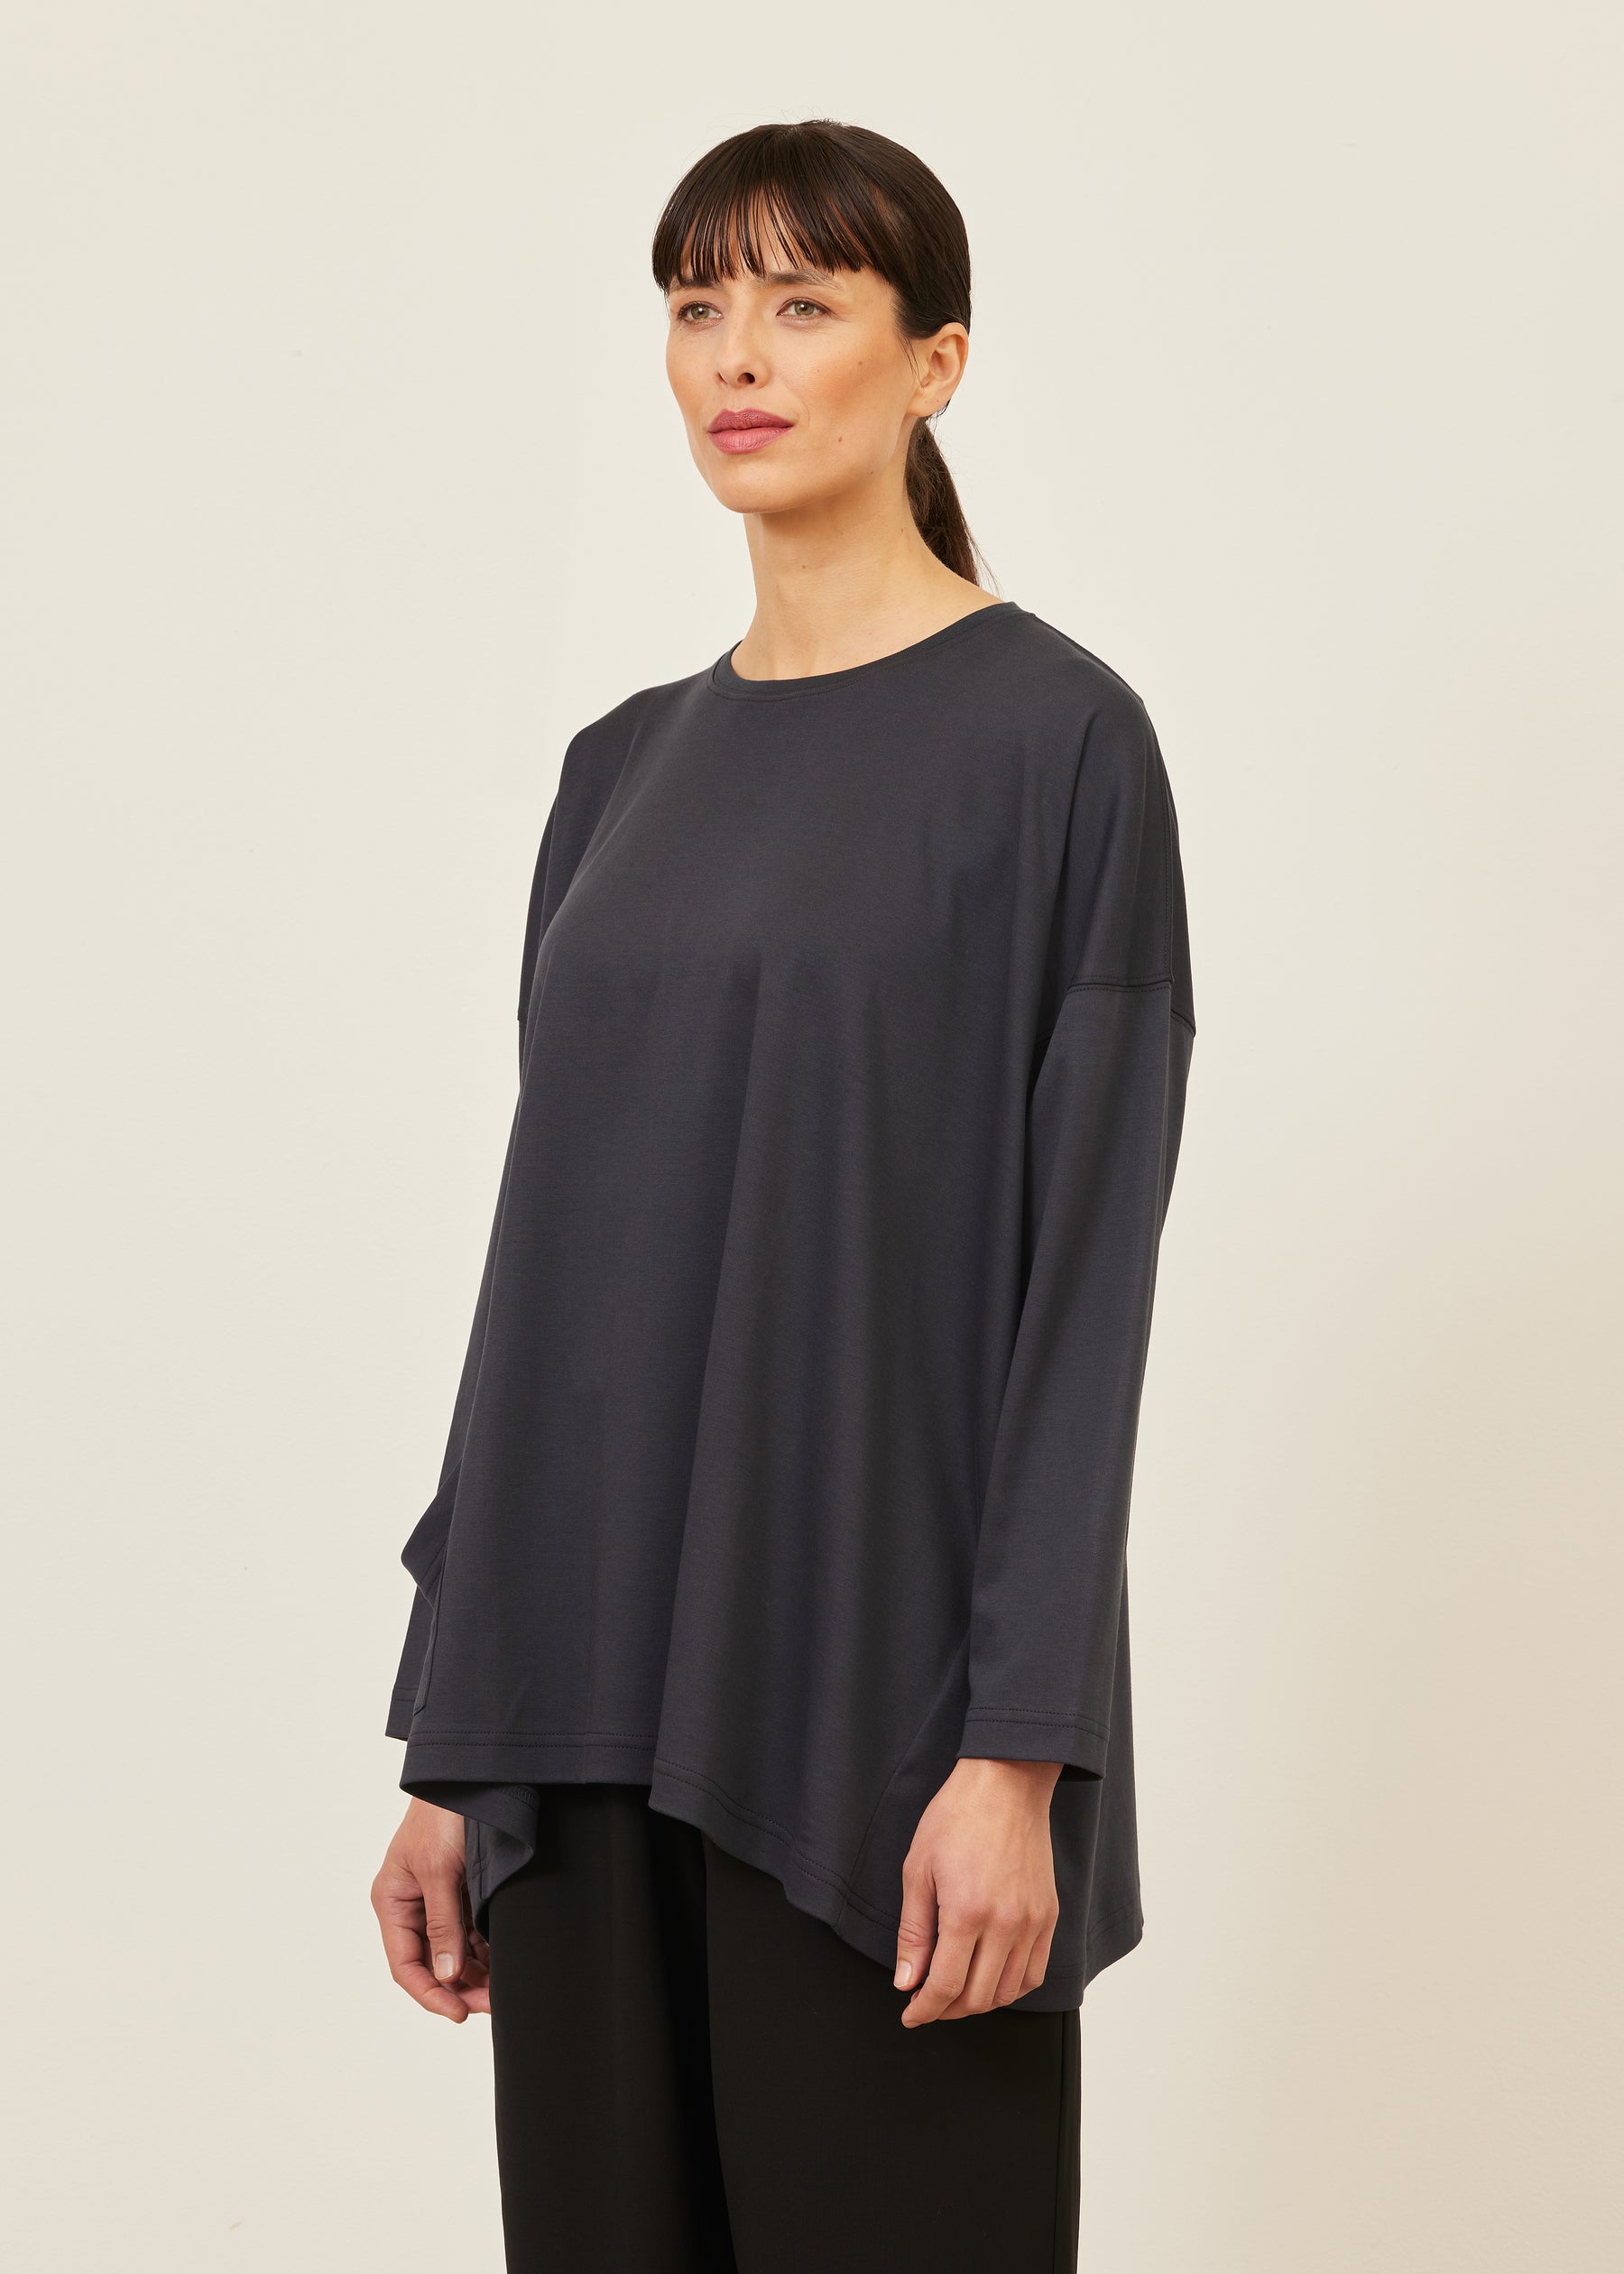 one pocket angle-to-front round neck t-shirt - long